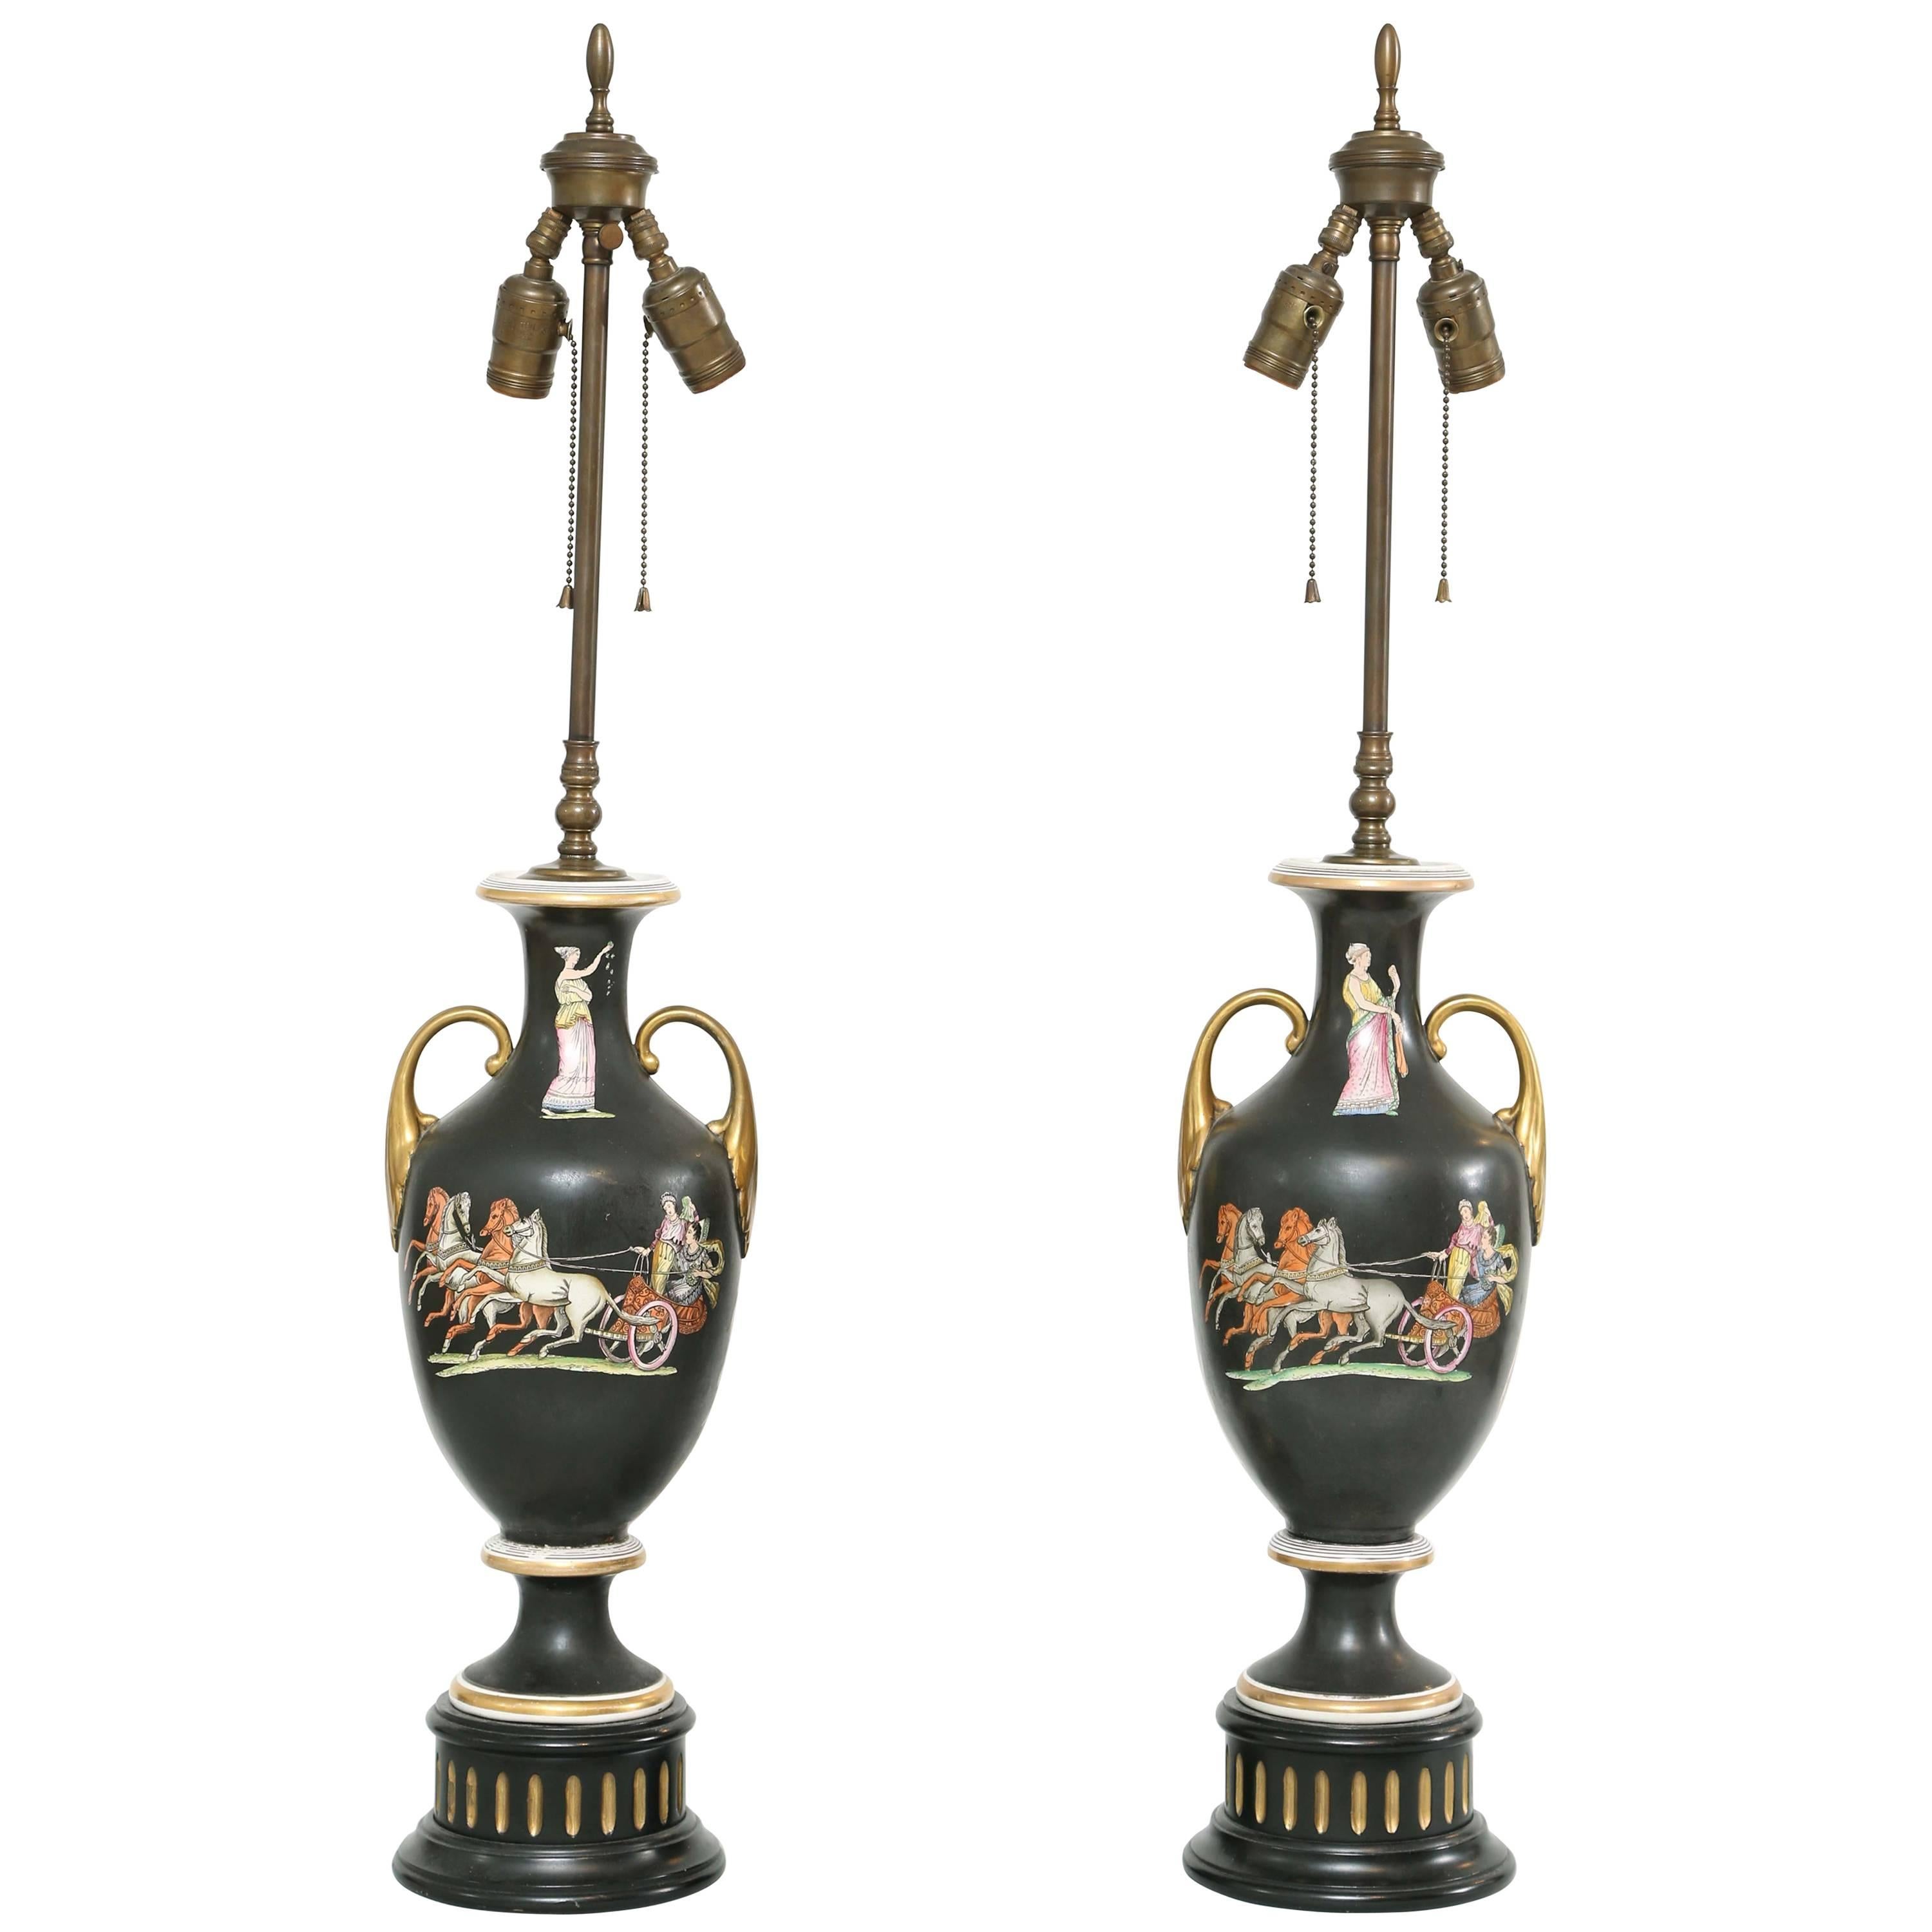 Pair of Staffordshire Classical Urn-Form Lamps